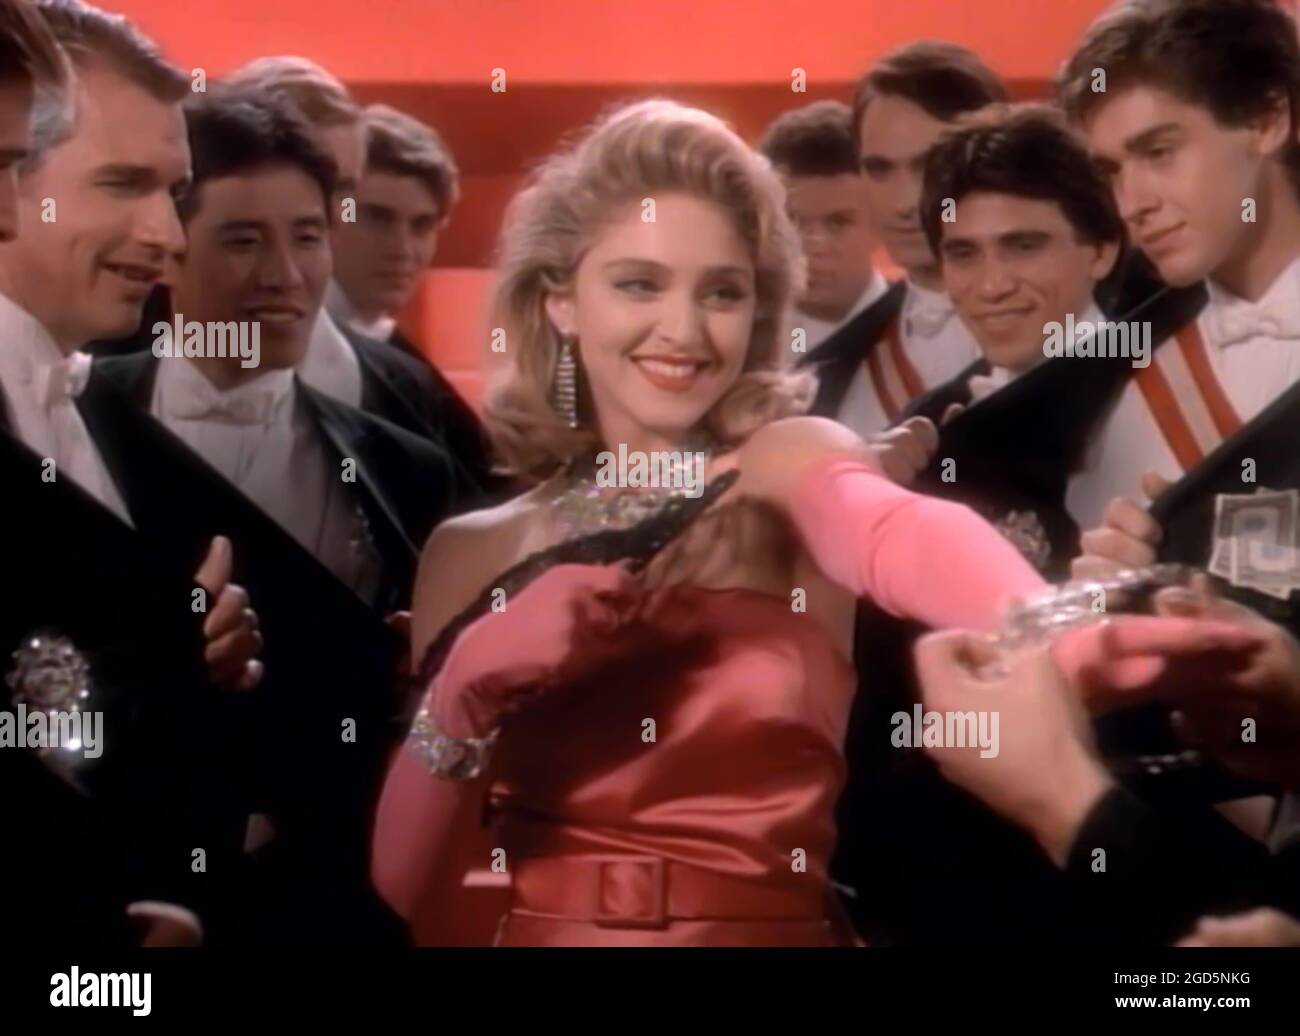 CLASSIC MUSIC VIDEOS. Los Angeles, USA 1984. Madonna in the video